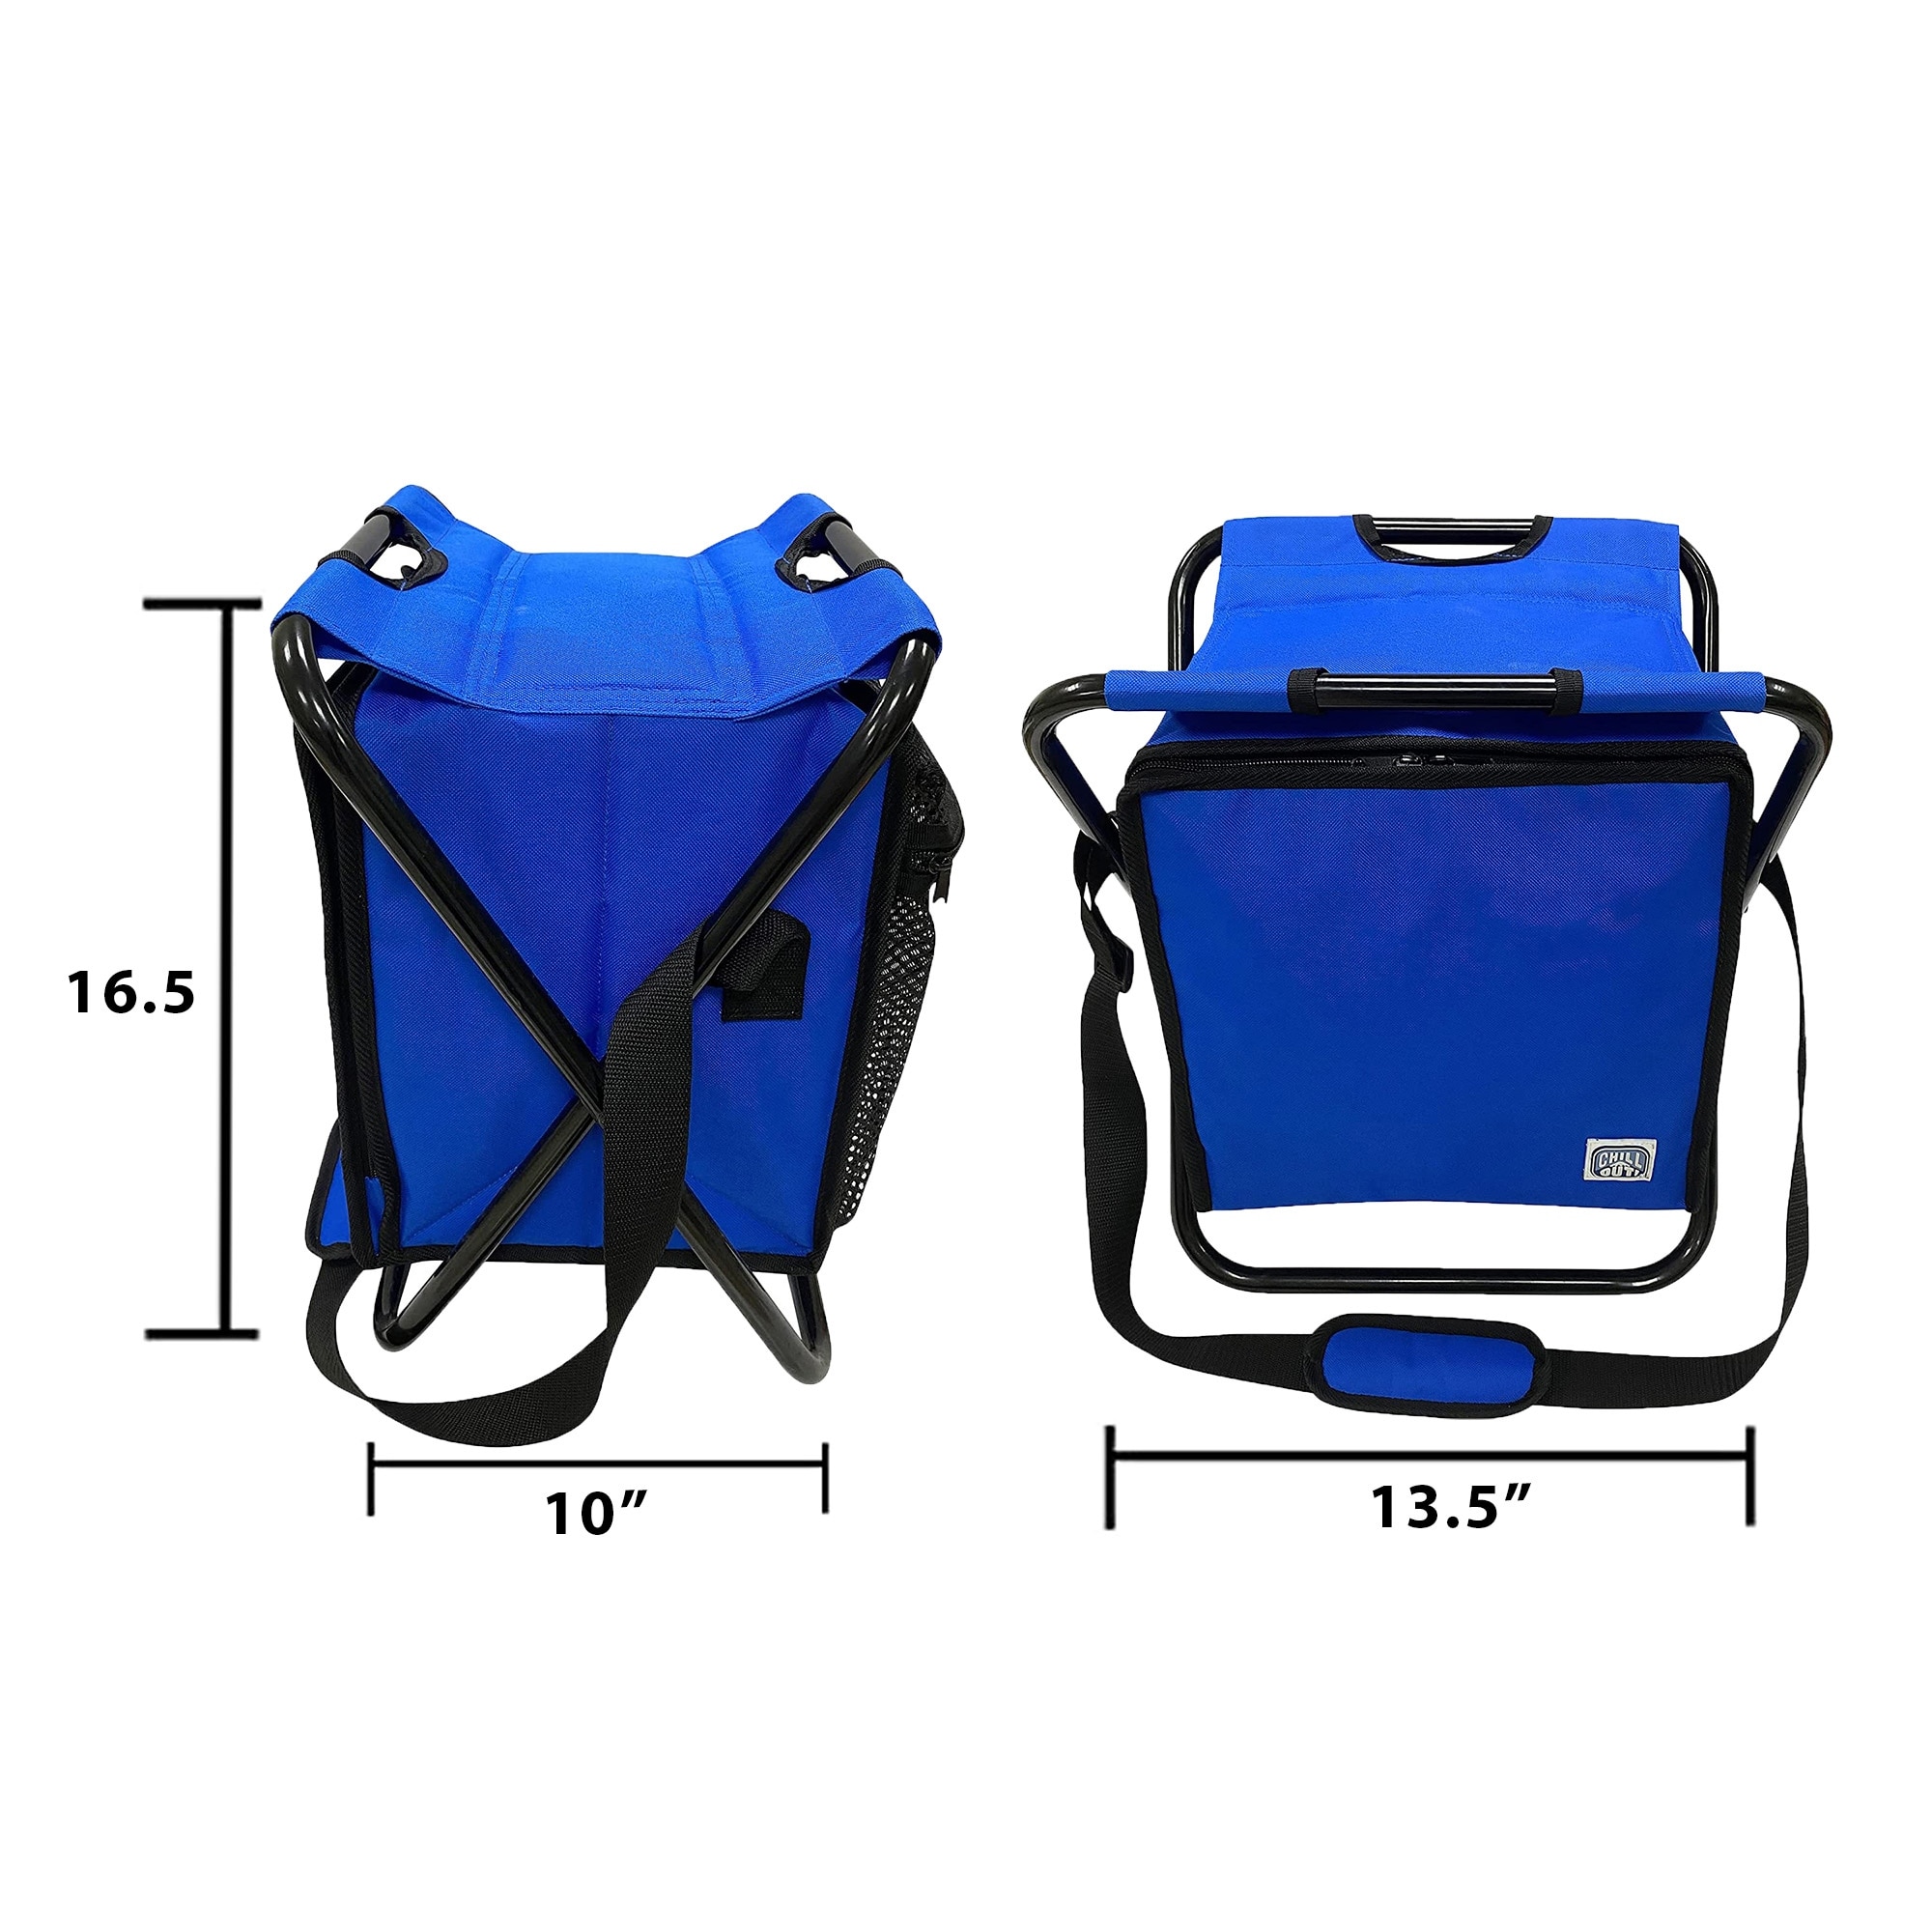 Chill Out- Frigi-Chair Soft Cooler with Built in Sport Seat in Blue